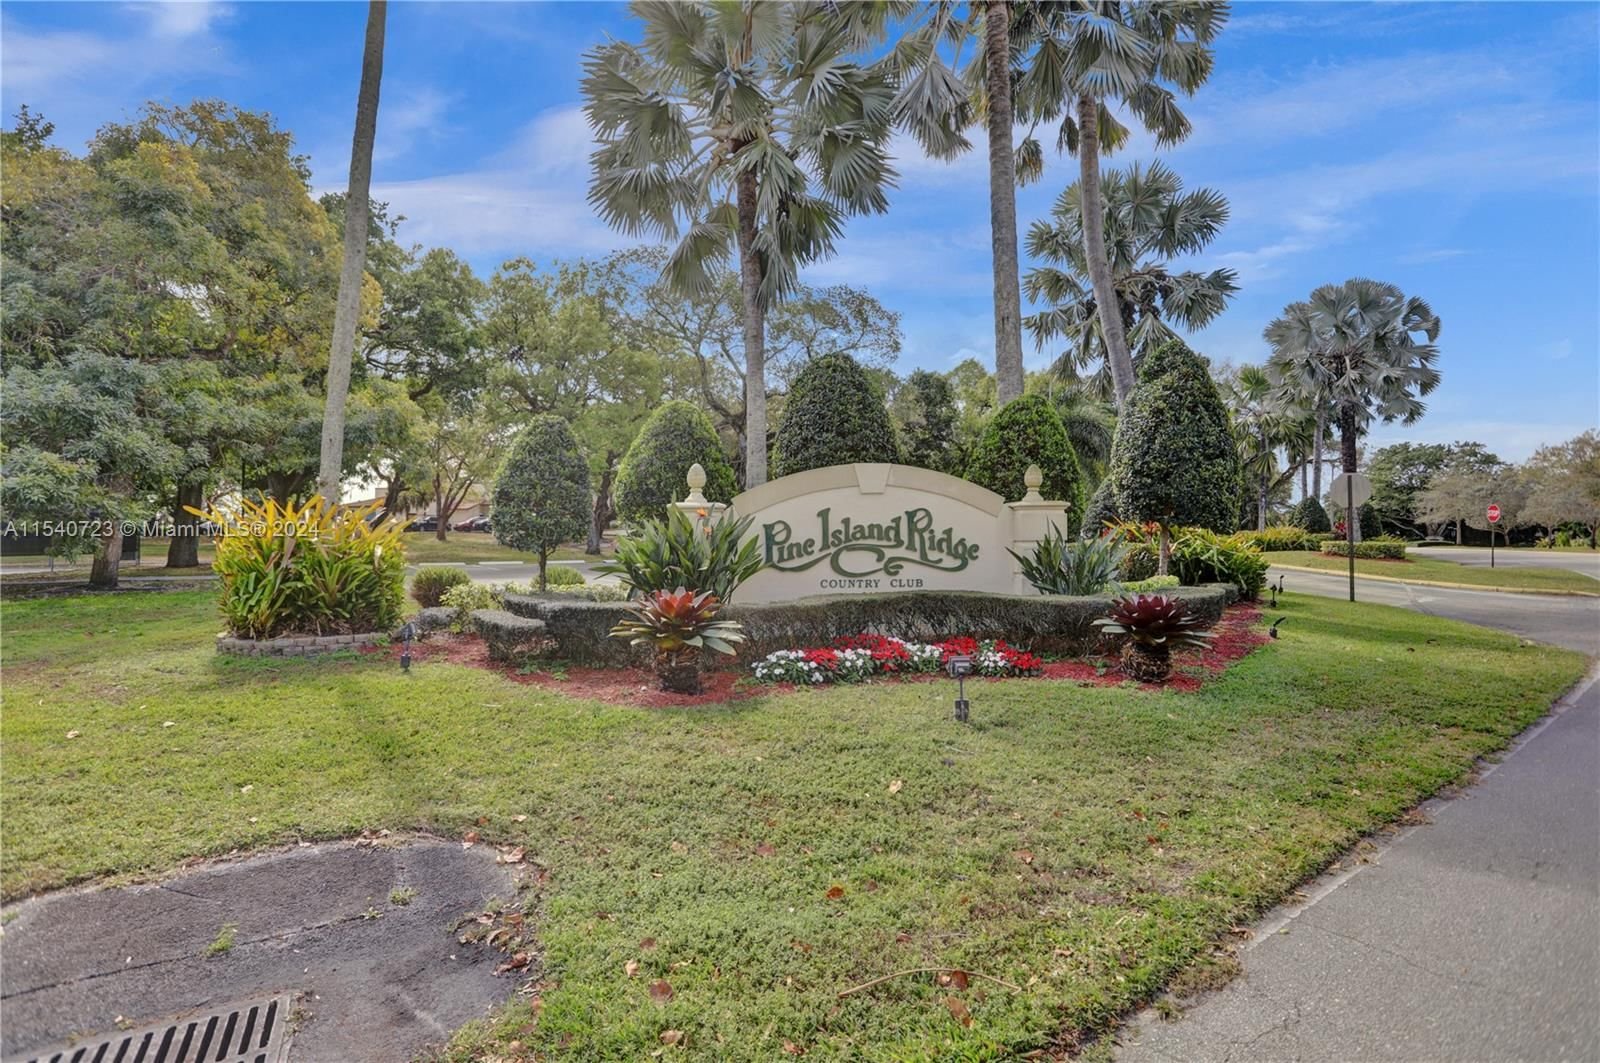 Real estate property located at 1524 Whitehall Dr #102, Broward County, Whitehall II, Davie, FL